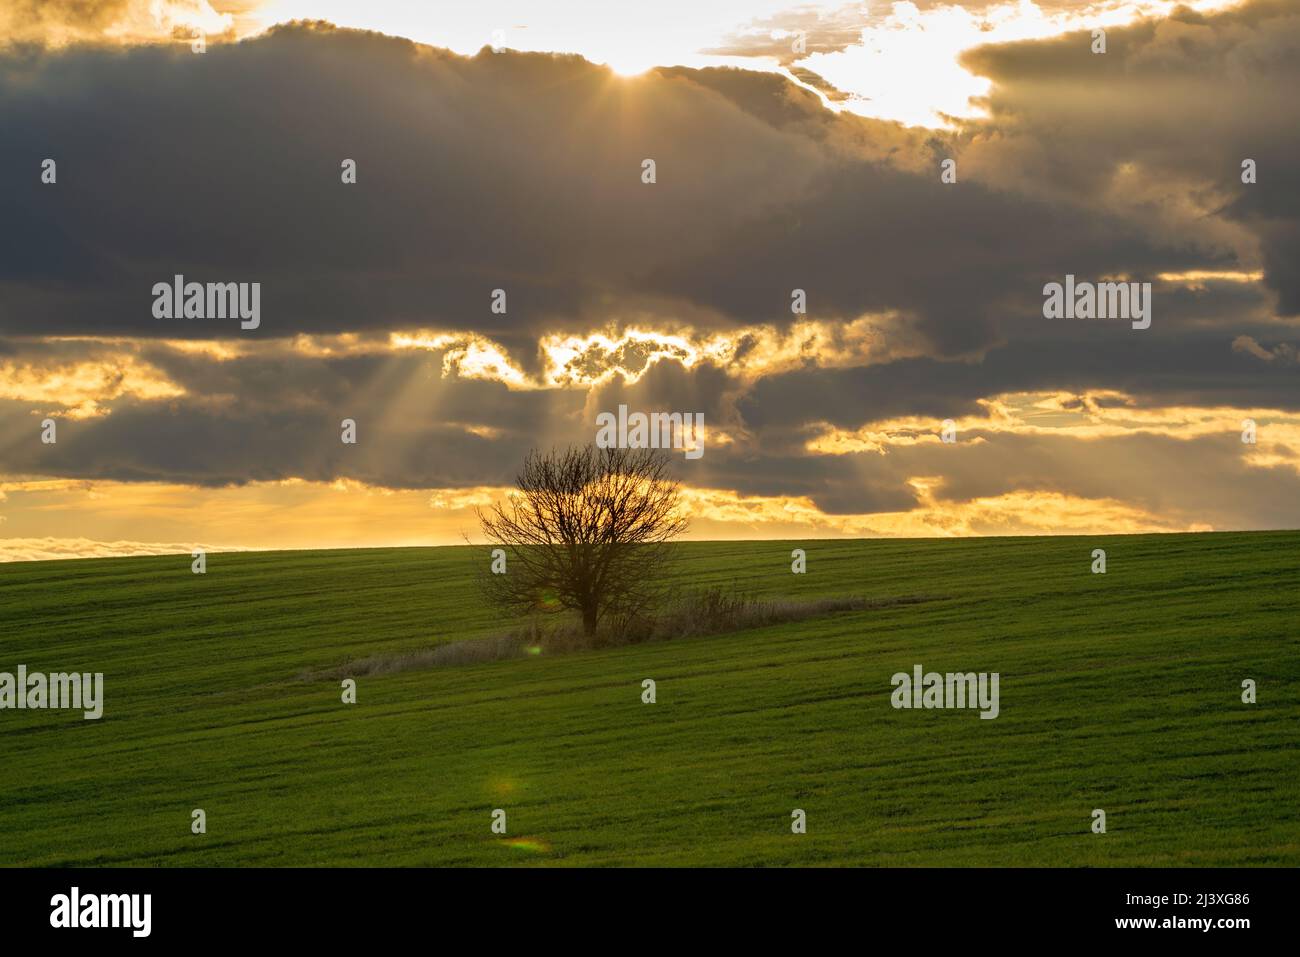 Beautiful scenic lonely tree on a green hill with agricultural plants lit by sunset sun rays through nice dramatic evening sky with clouds. Stock Photo